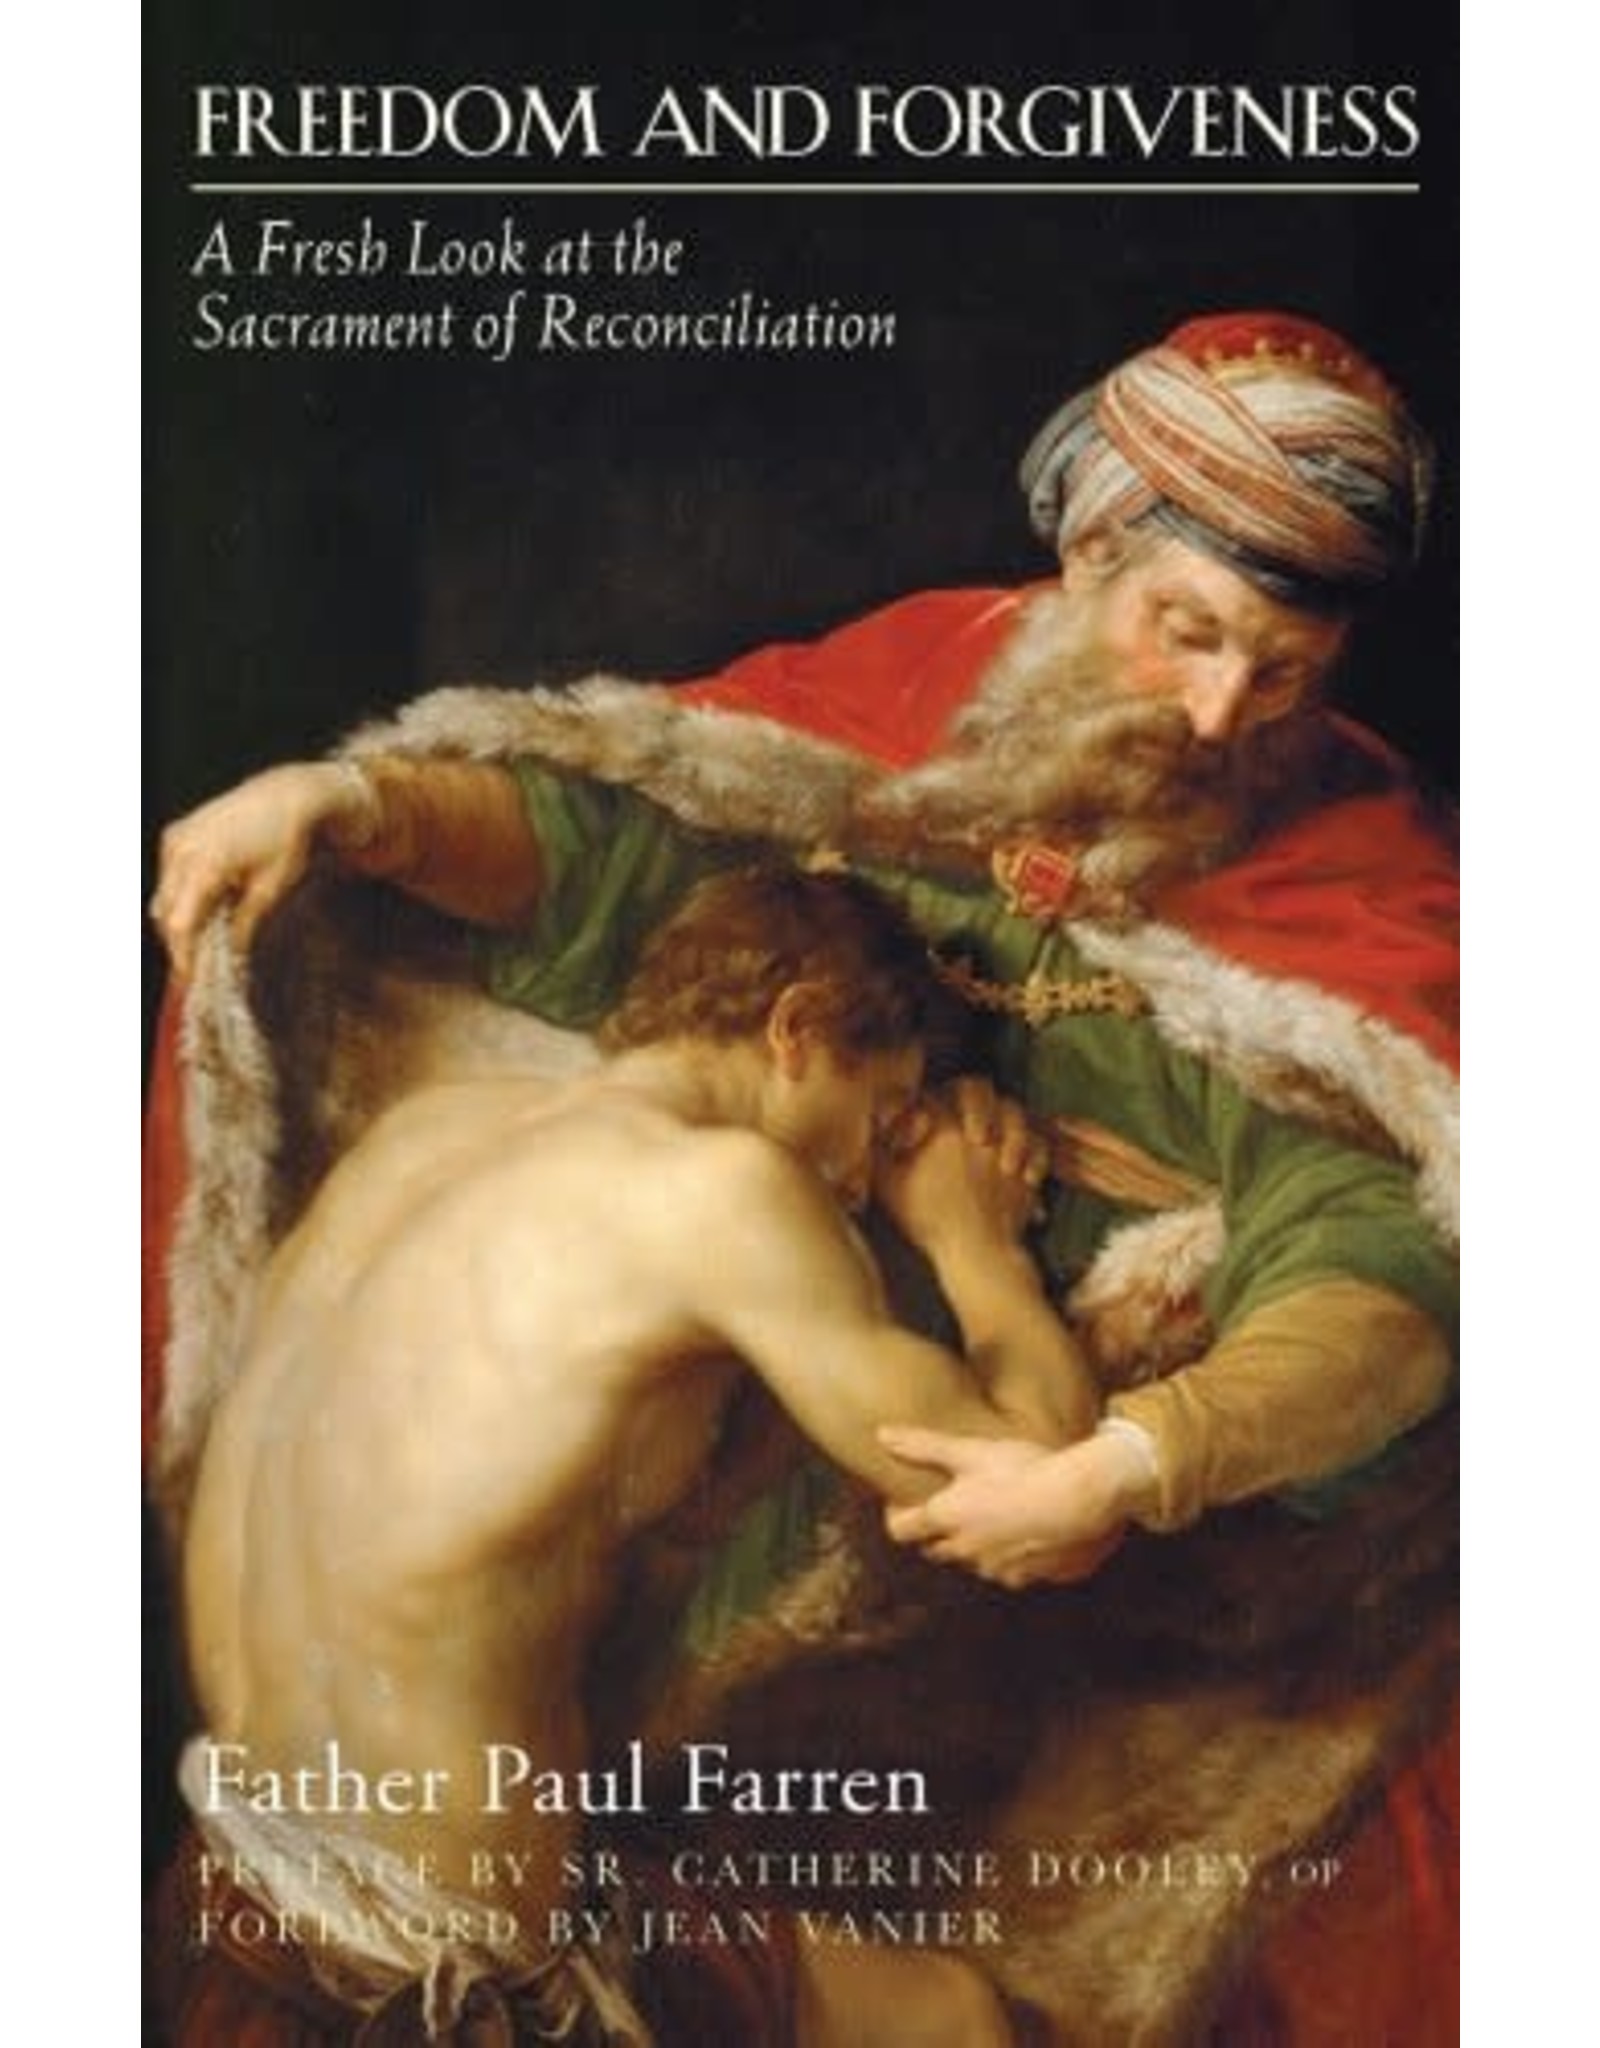 Paraclete Press Freedom and Forgiveness: A Fresh Look at the Sacrament of Reconciliation by Father Paul Farren (Paperback)